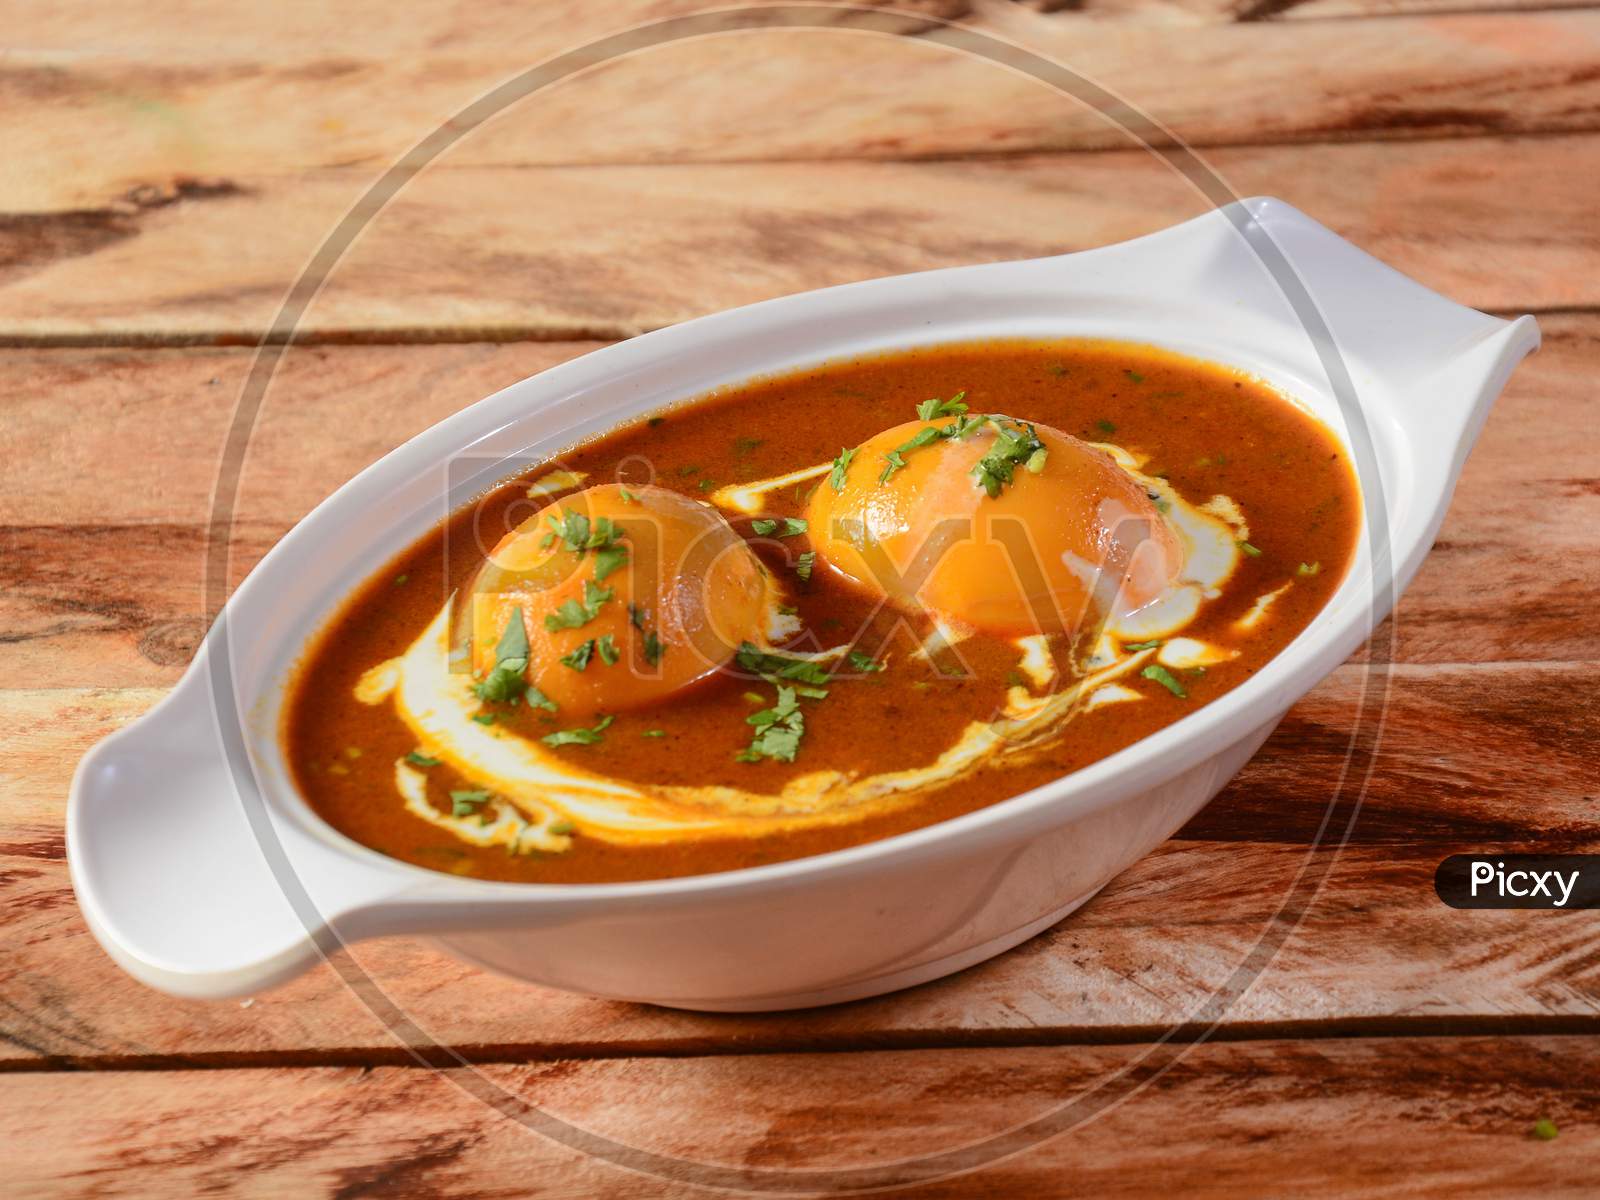 Anda Masala Or Egg Curry Is Popular Indian Spicy Food, Served In A Ceramic Bowl Over Rustic Wooden Background. Selective Focus